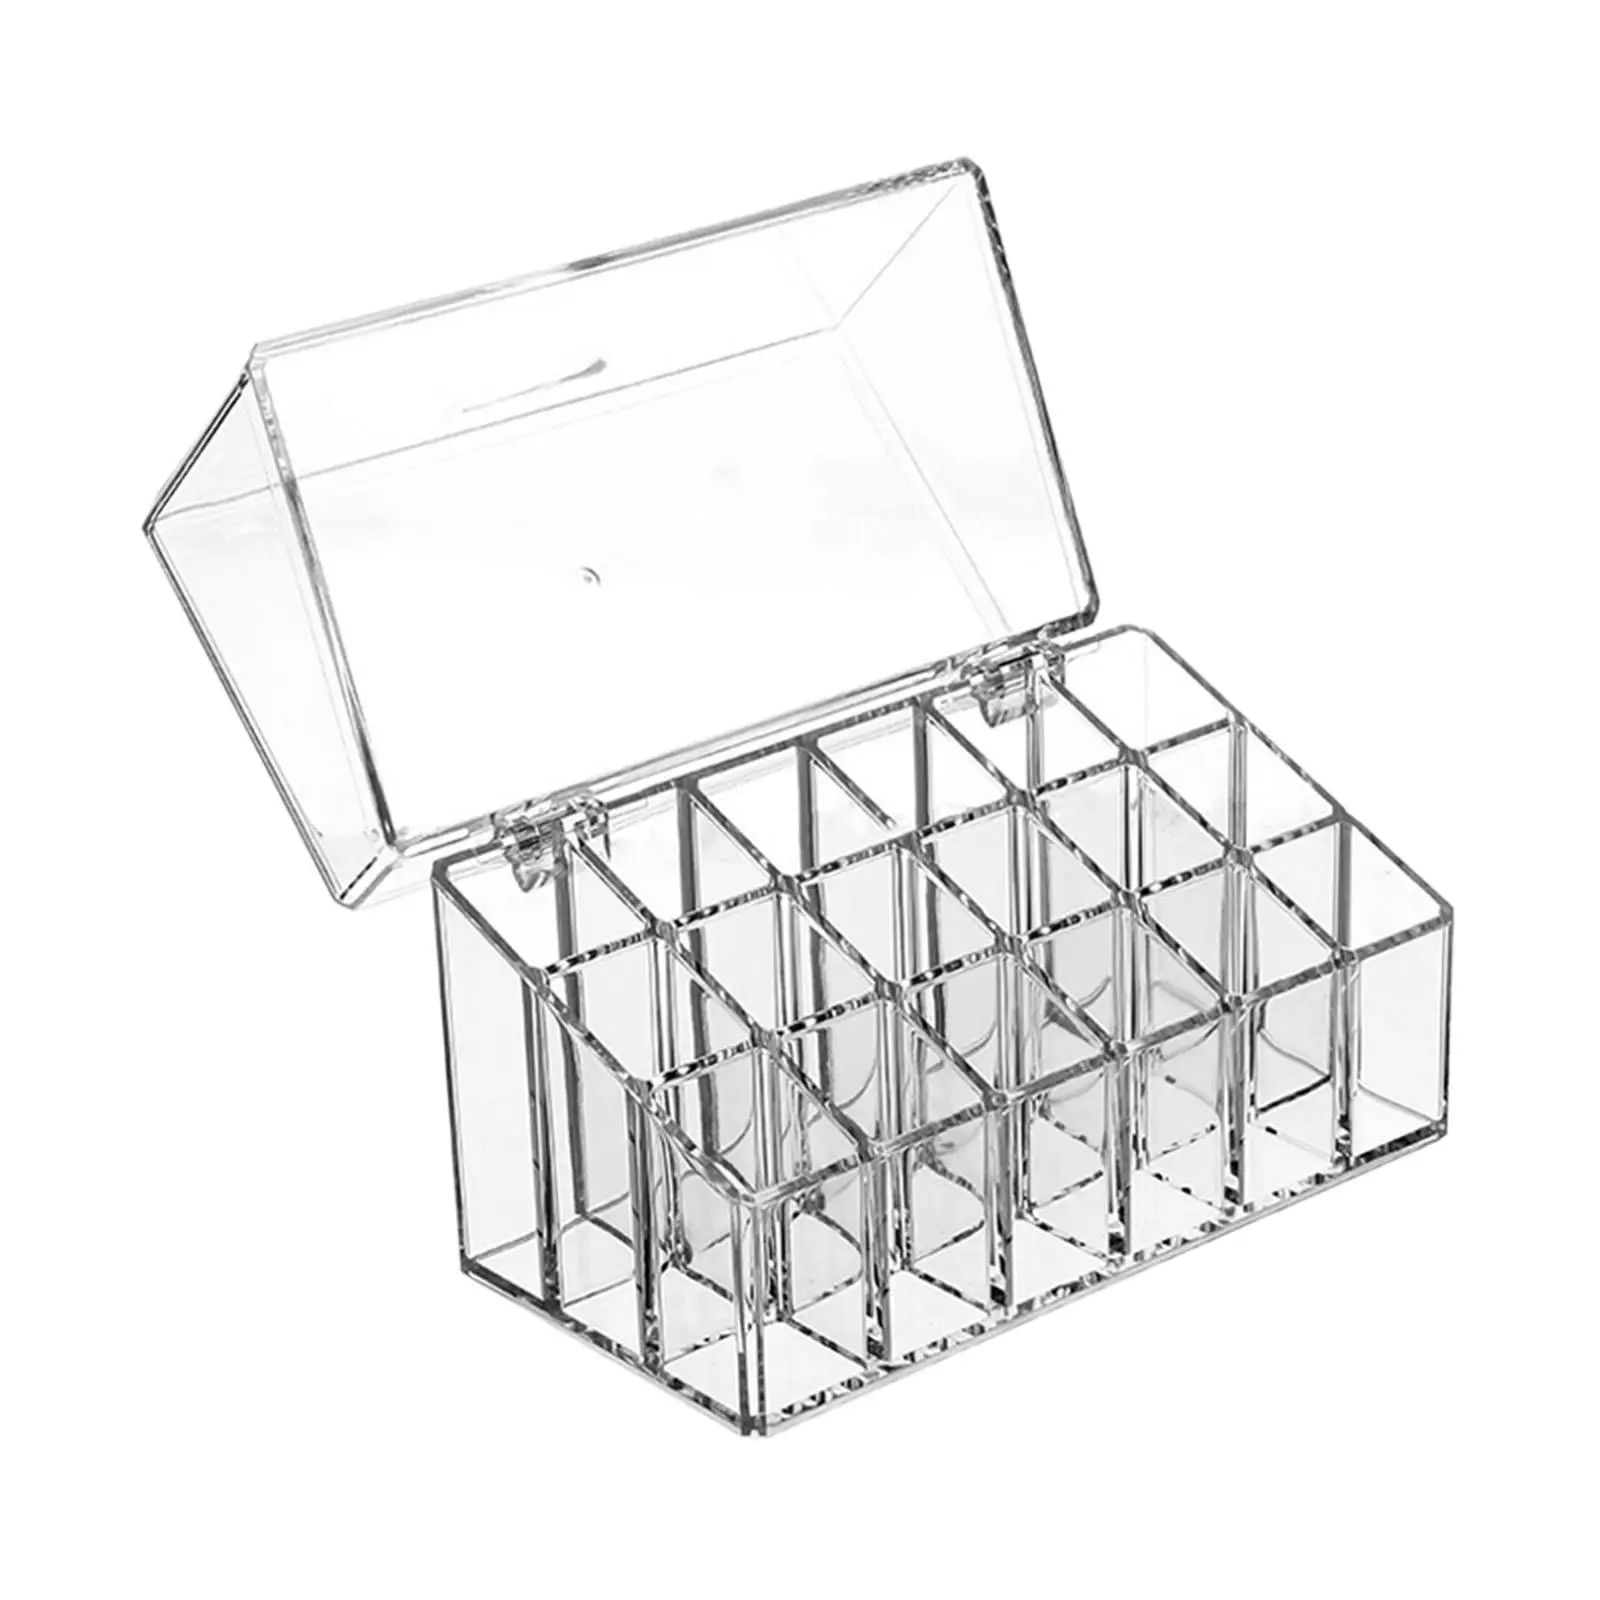 Lipstick Holder Case 18 Grids Cosmetic Box Display Stand Storage Stand Transparent Lip Gloss Organizer with Lid